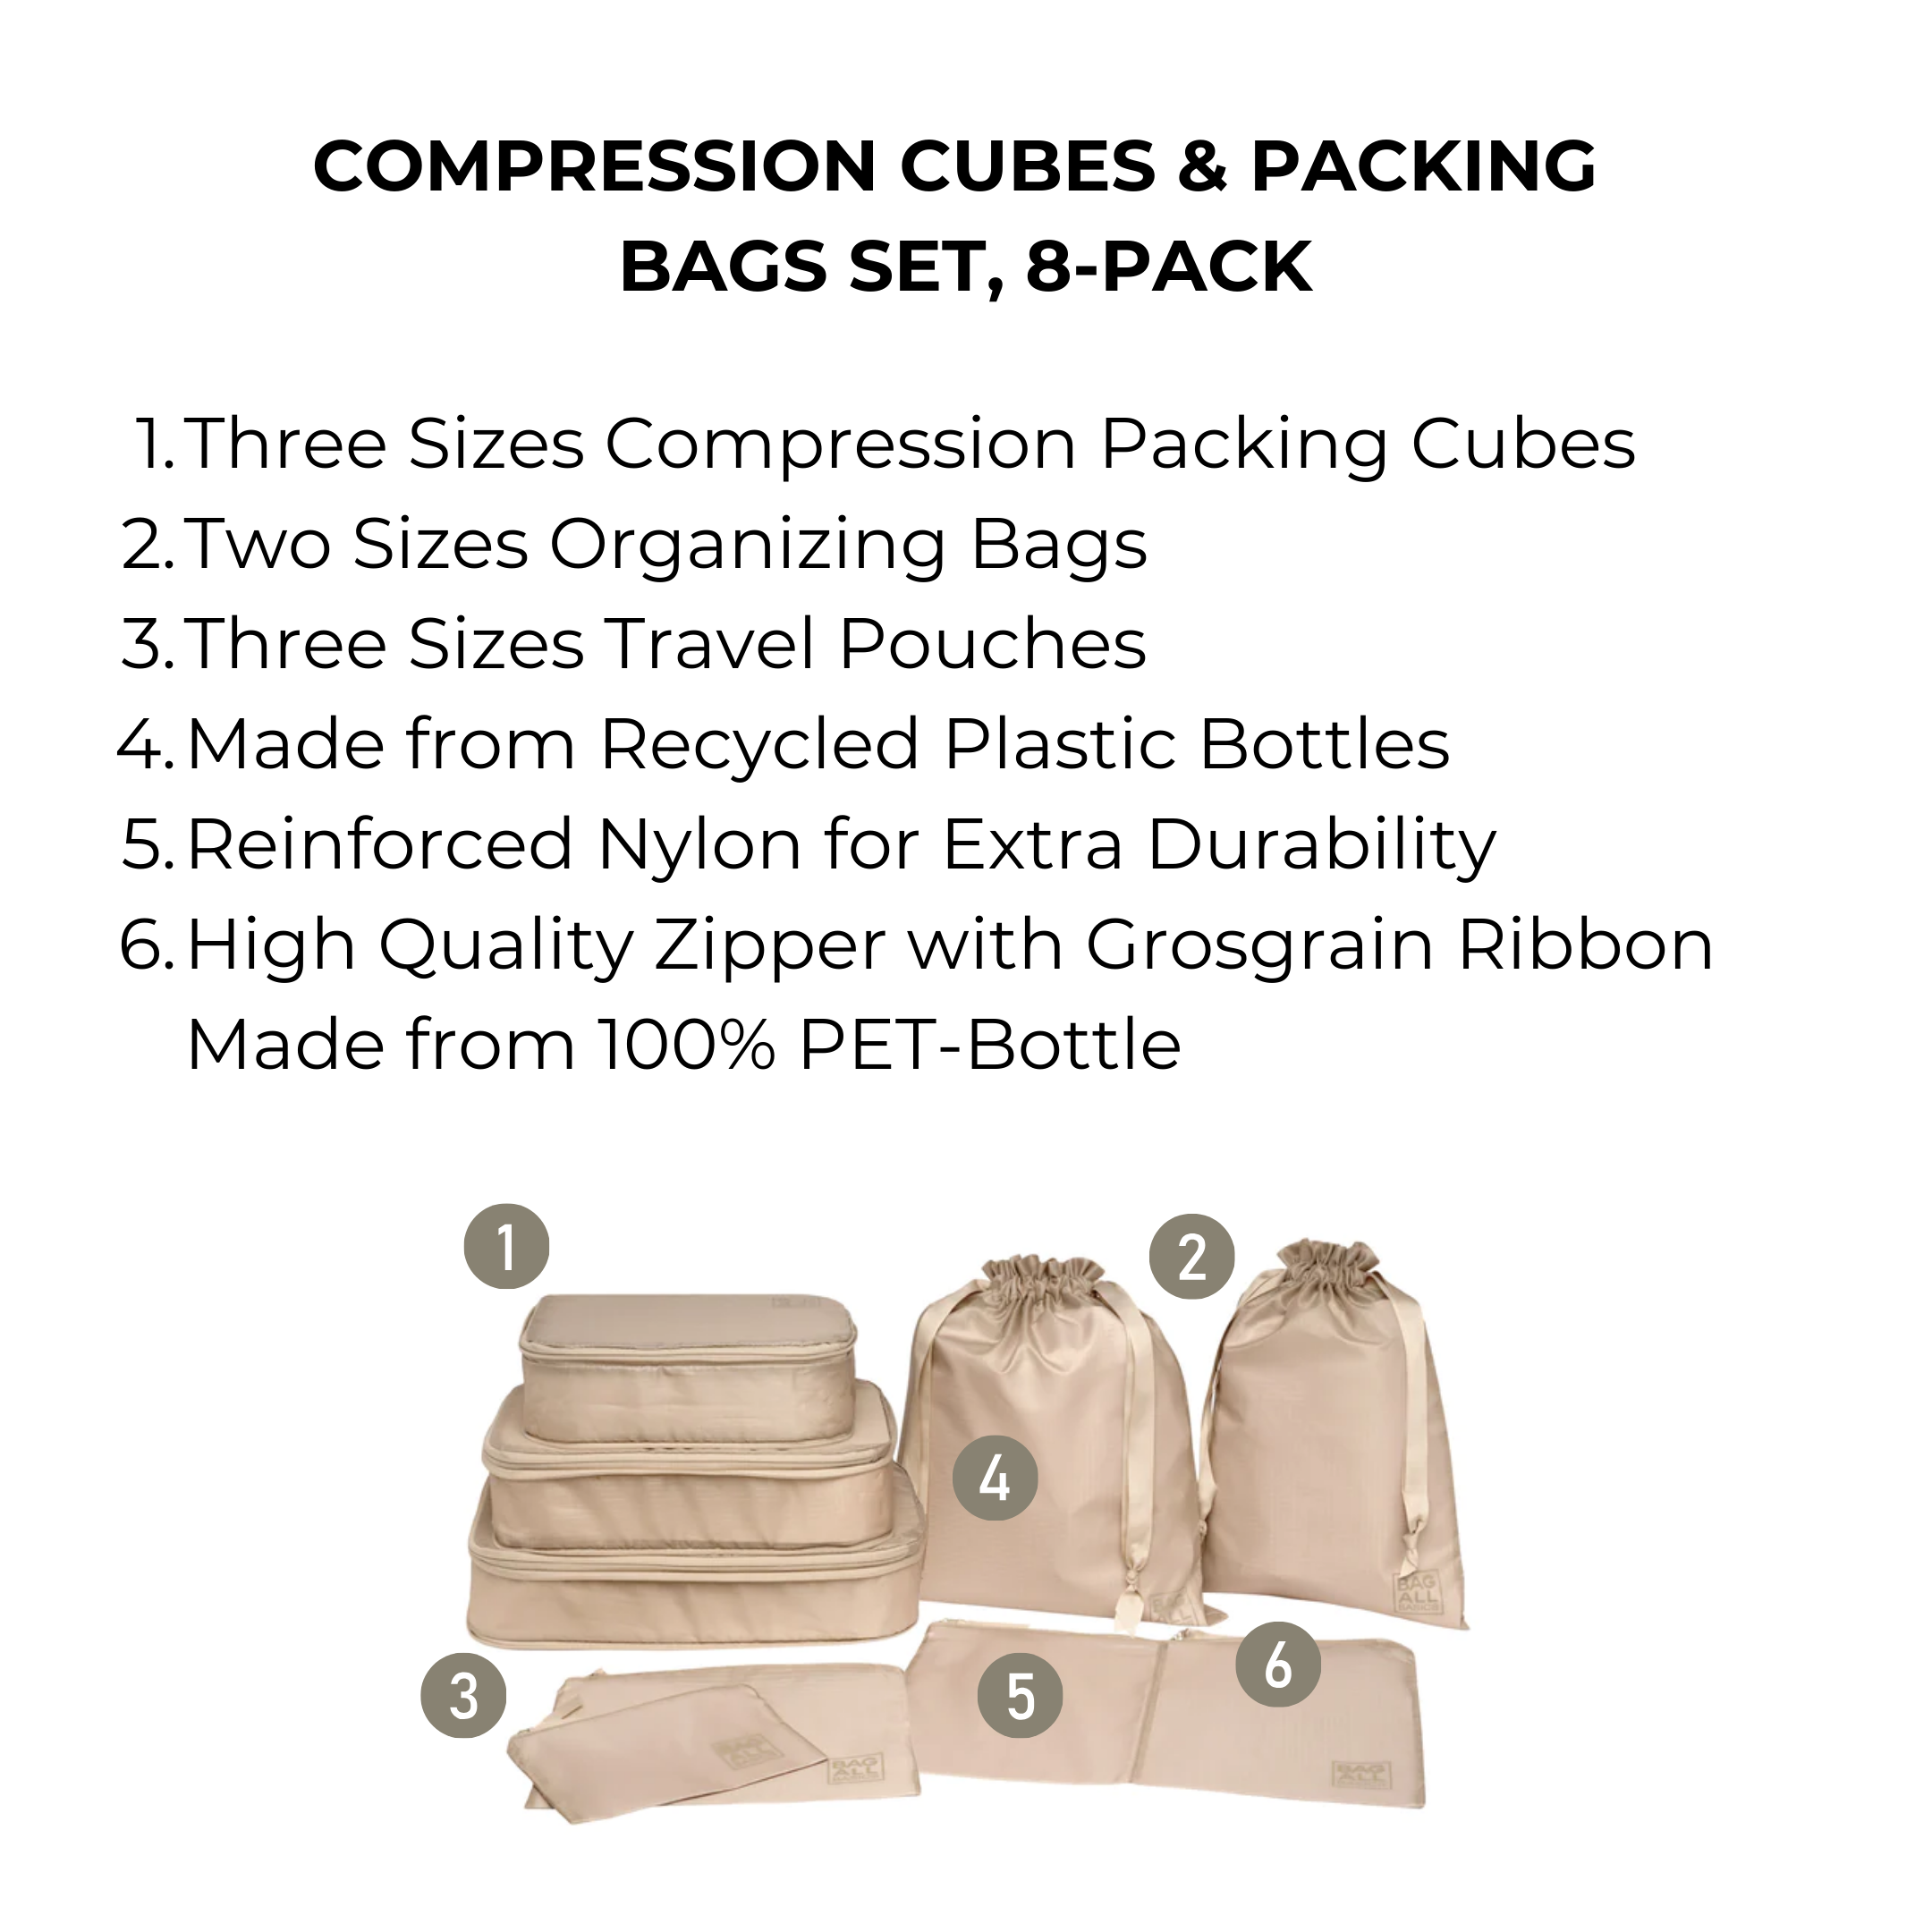 Compression Cubes & Packing Bags Set, 8-pack, Taupe | Bag-all